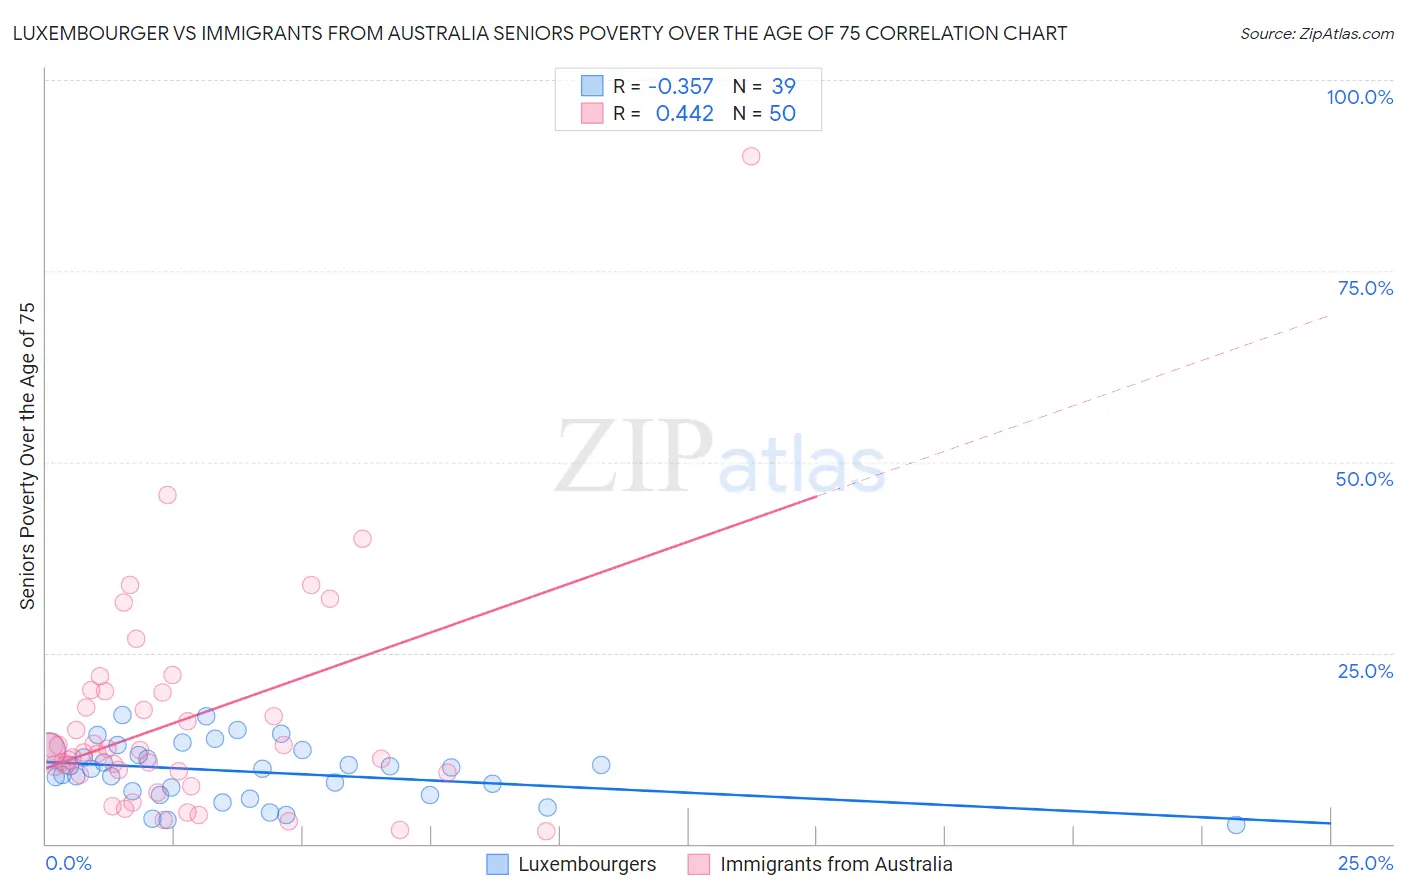 Luxembourger vs Immigrants from Australia Seniors Poverty Over the Age of 75